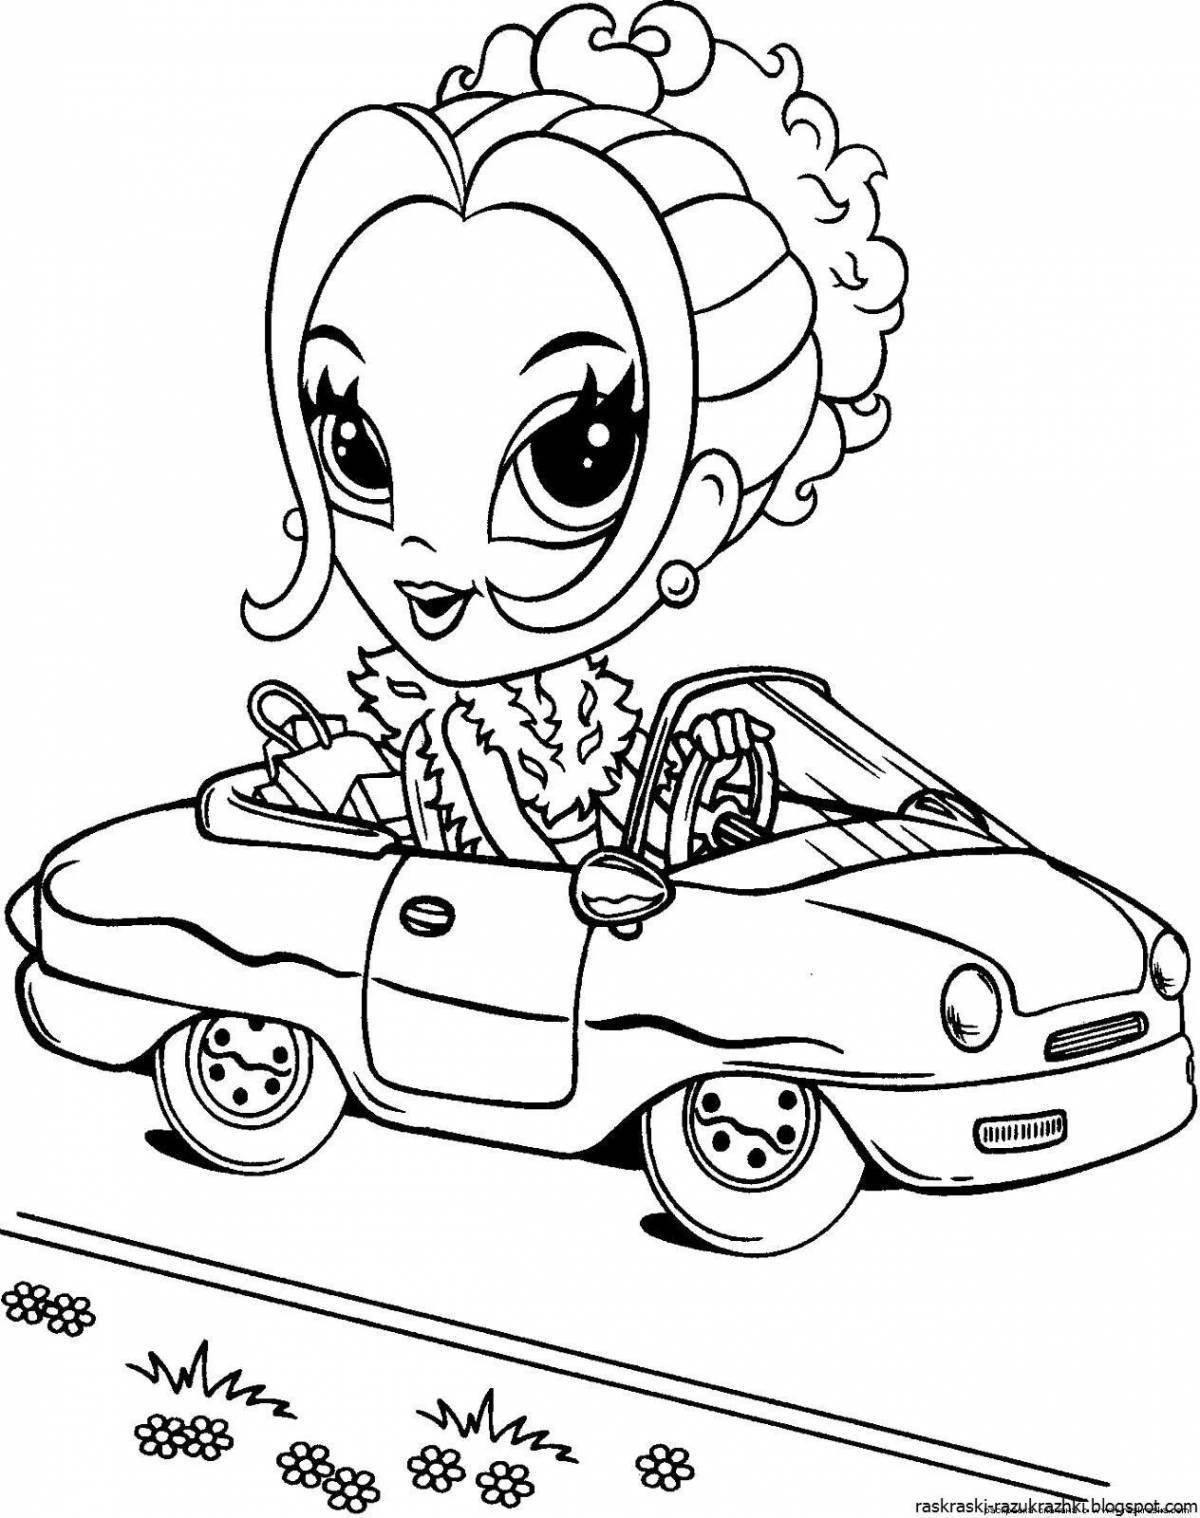 Color-frenzy coloring page 9 10 years